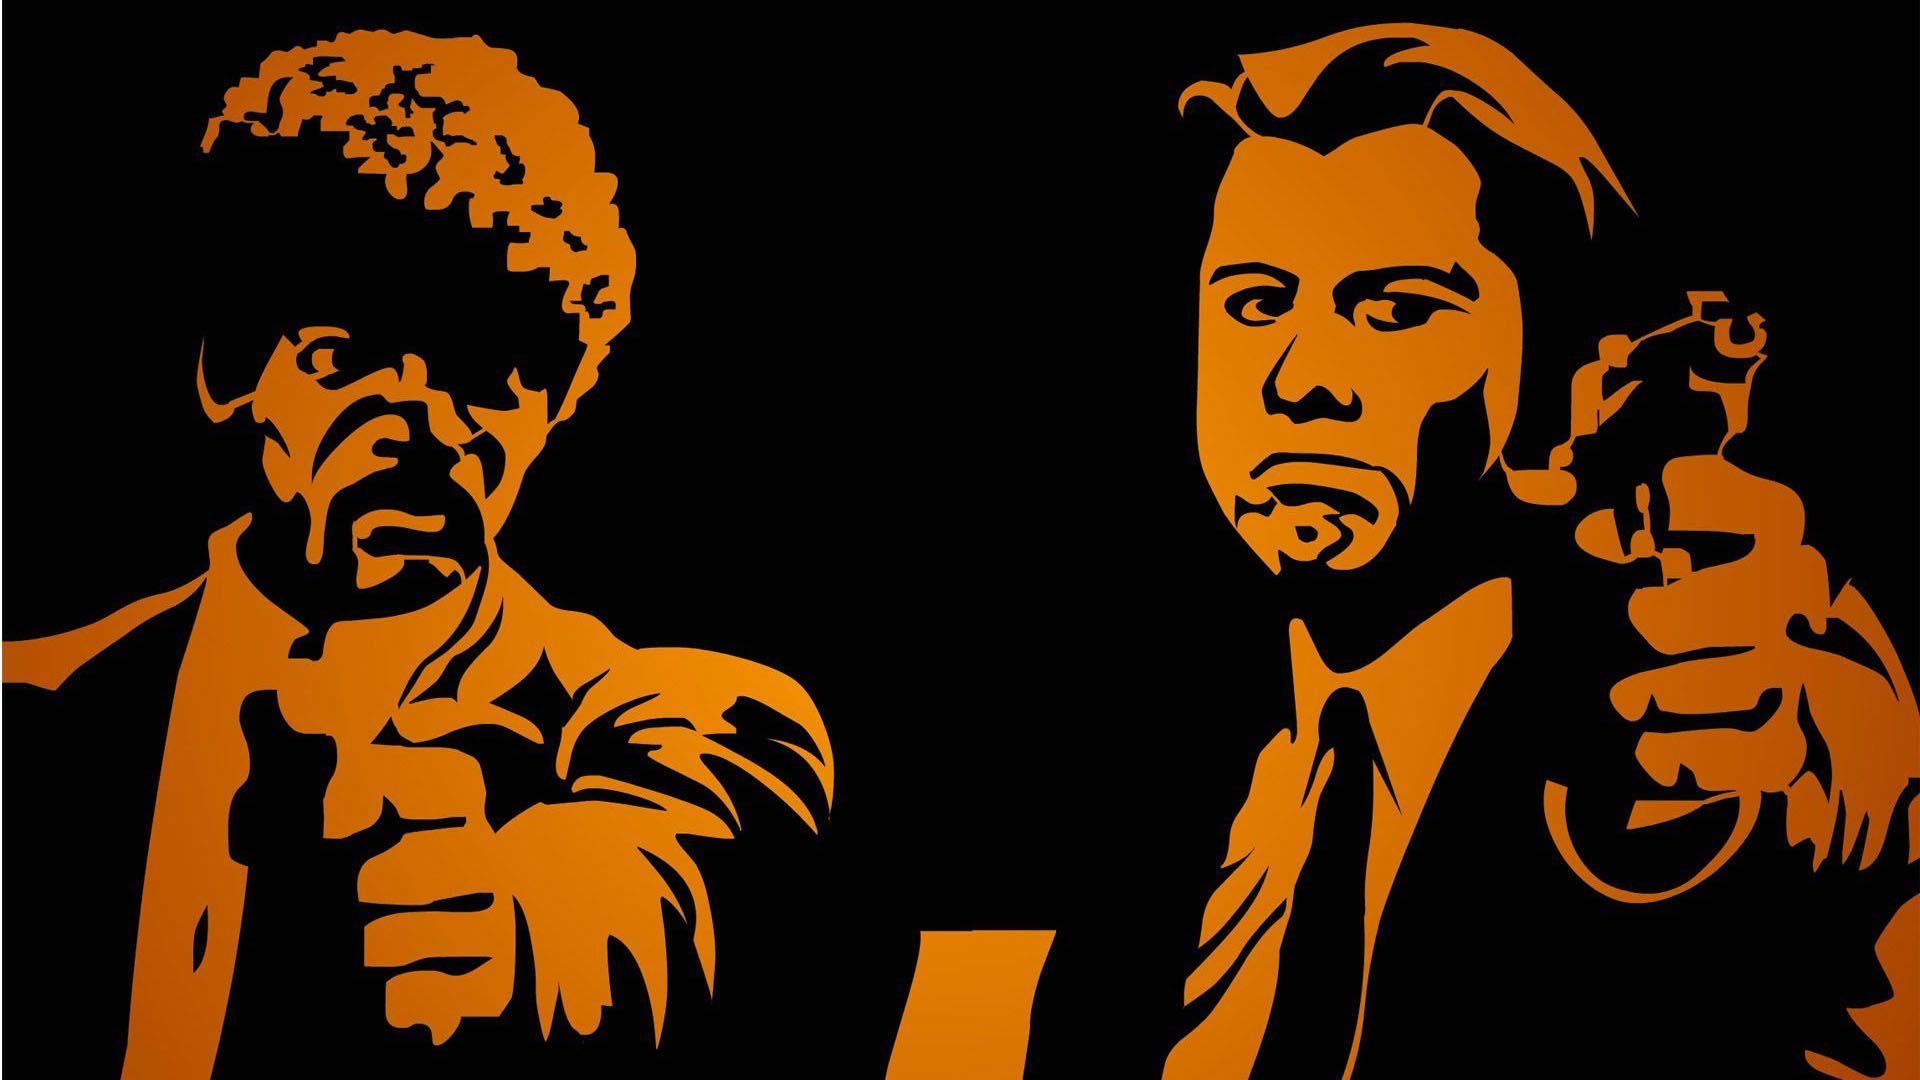 Star Wars Pulp Fiction Wallpapers